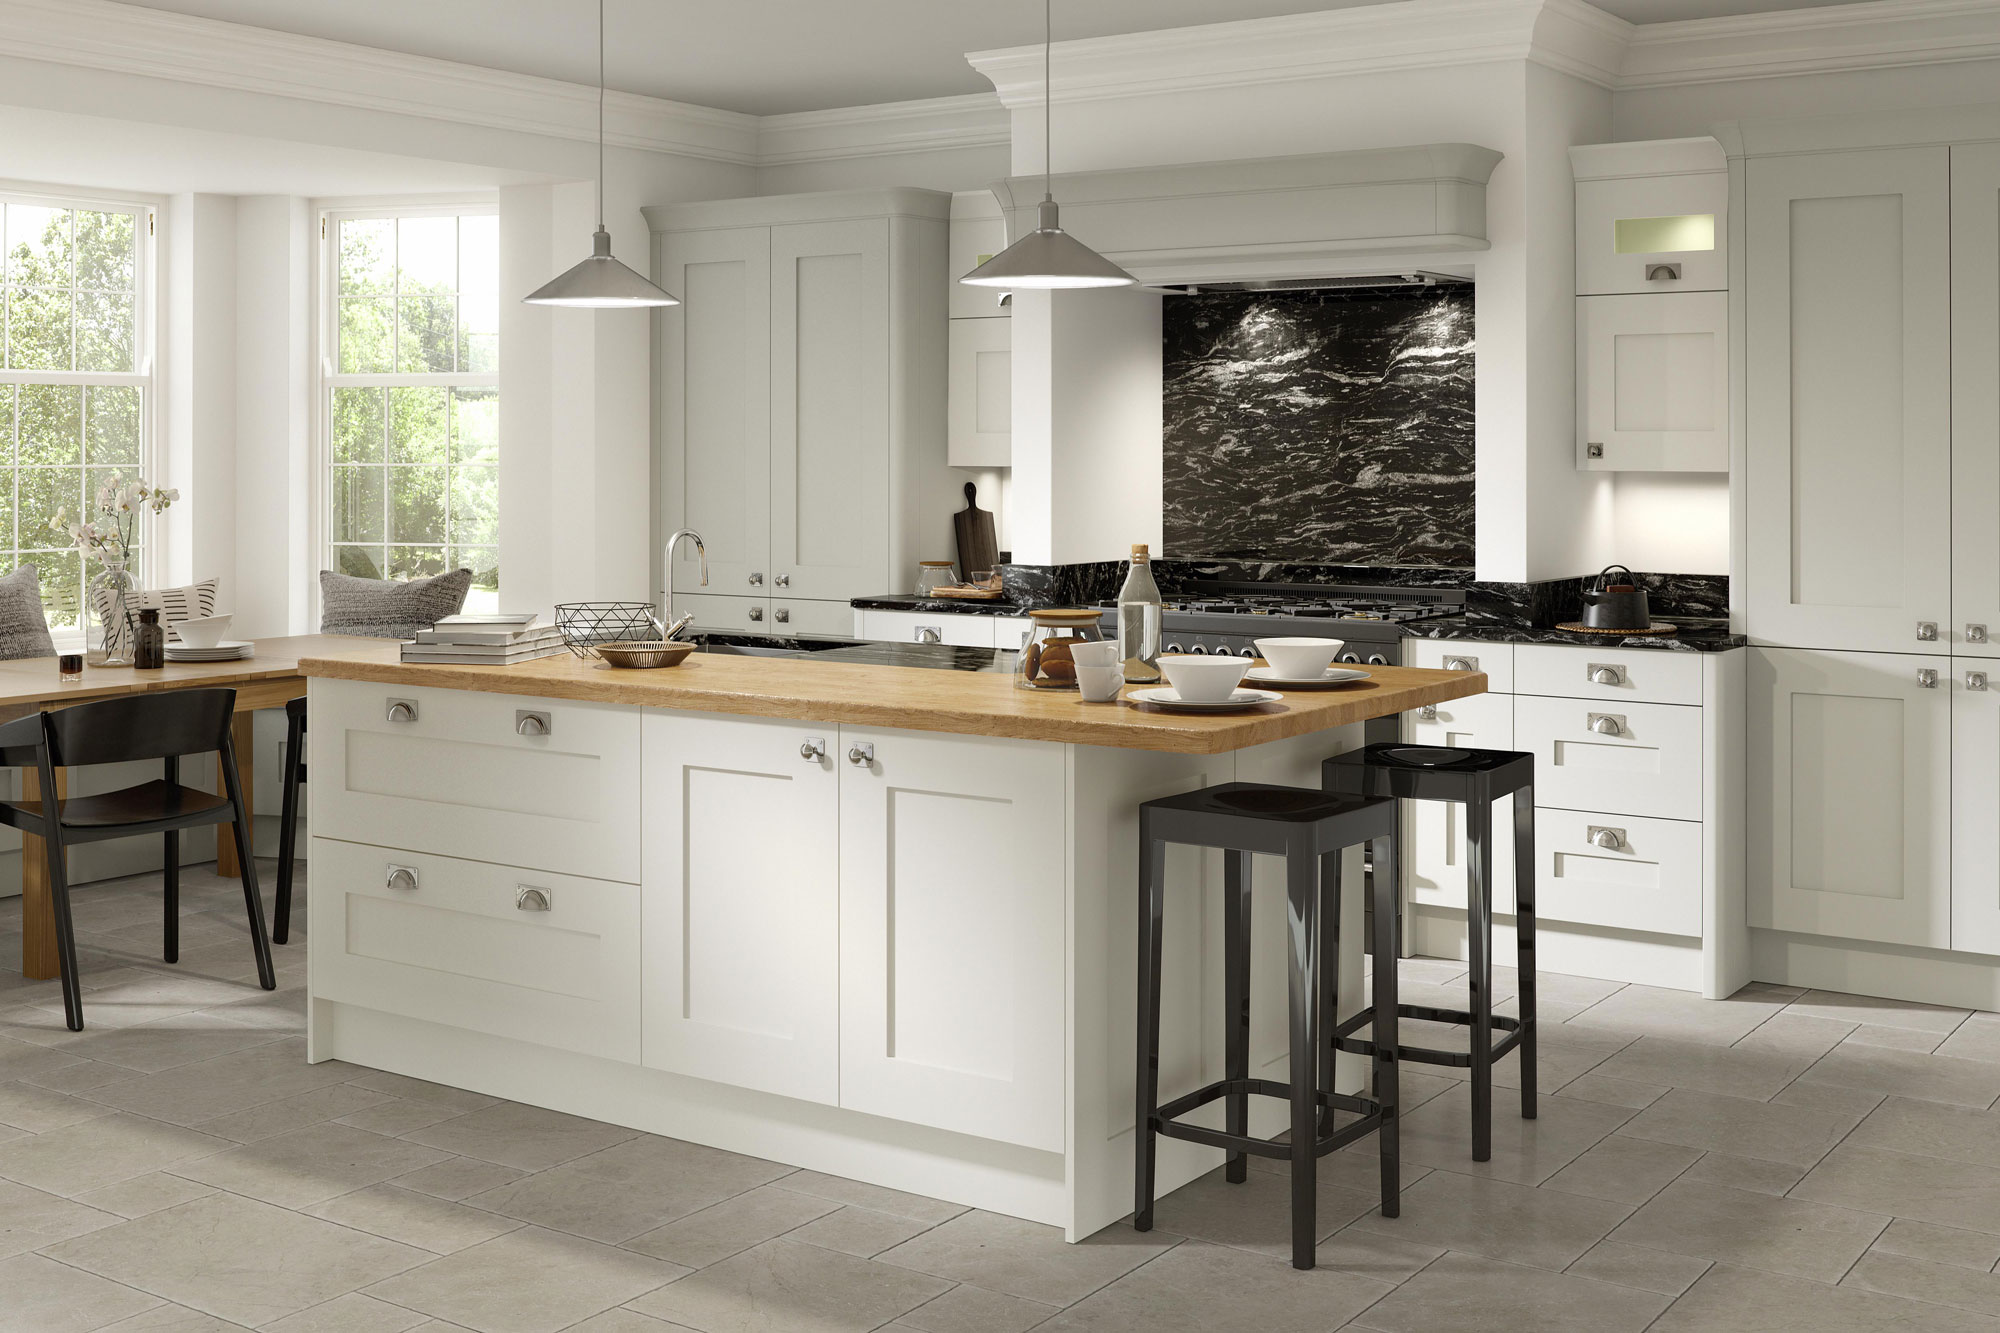 A contemporary wooden kitchen in partridge grey